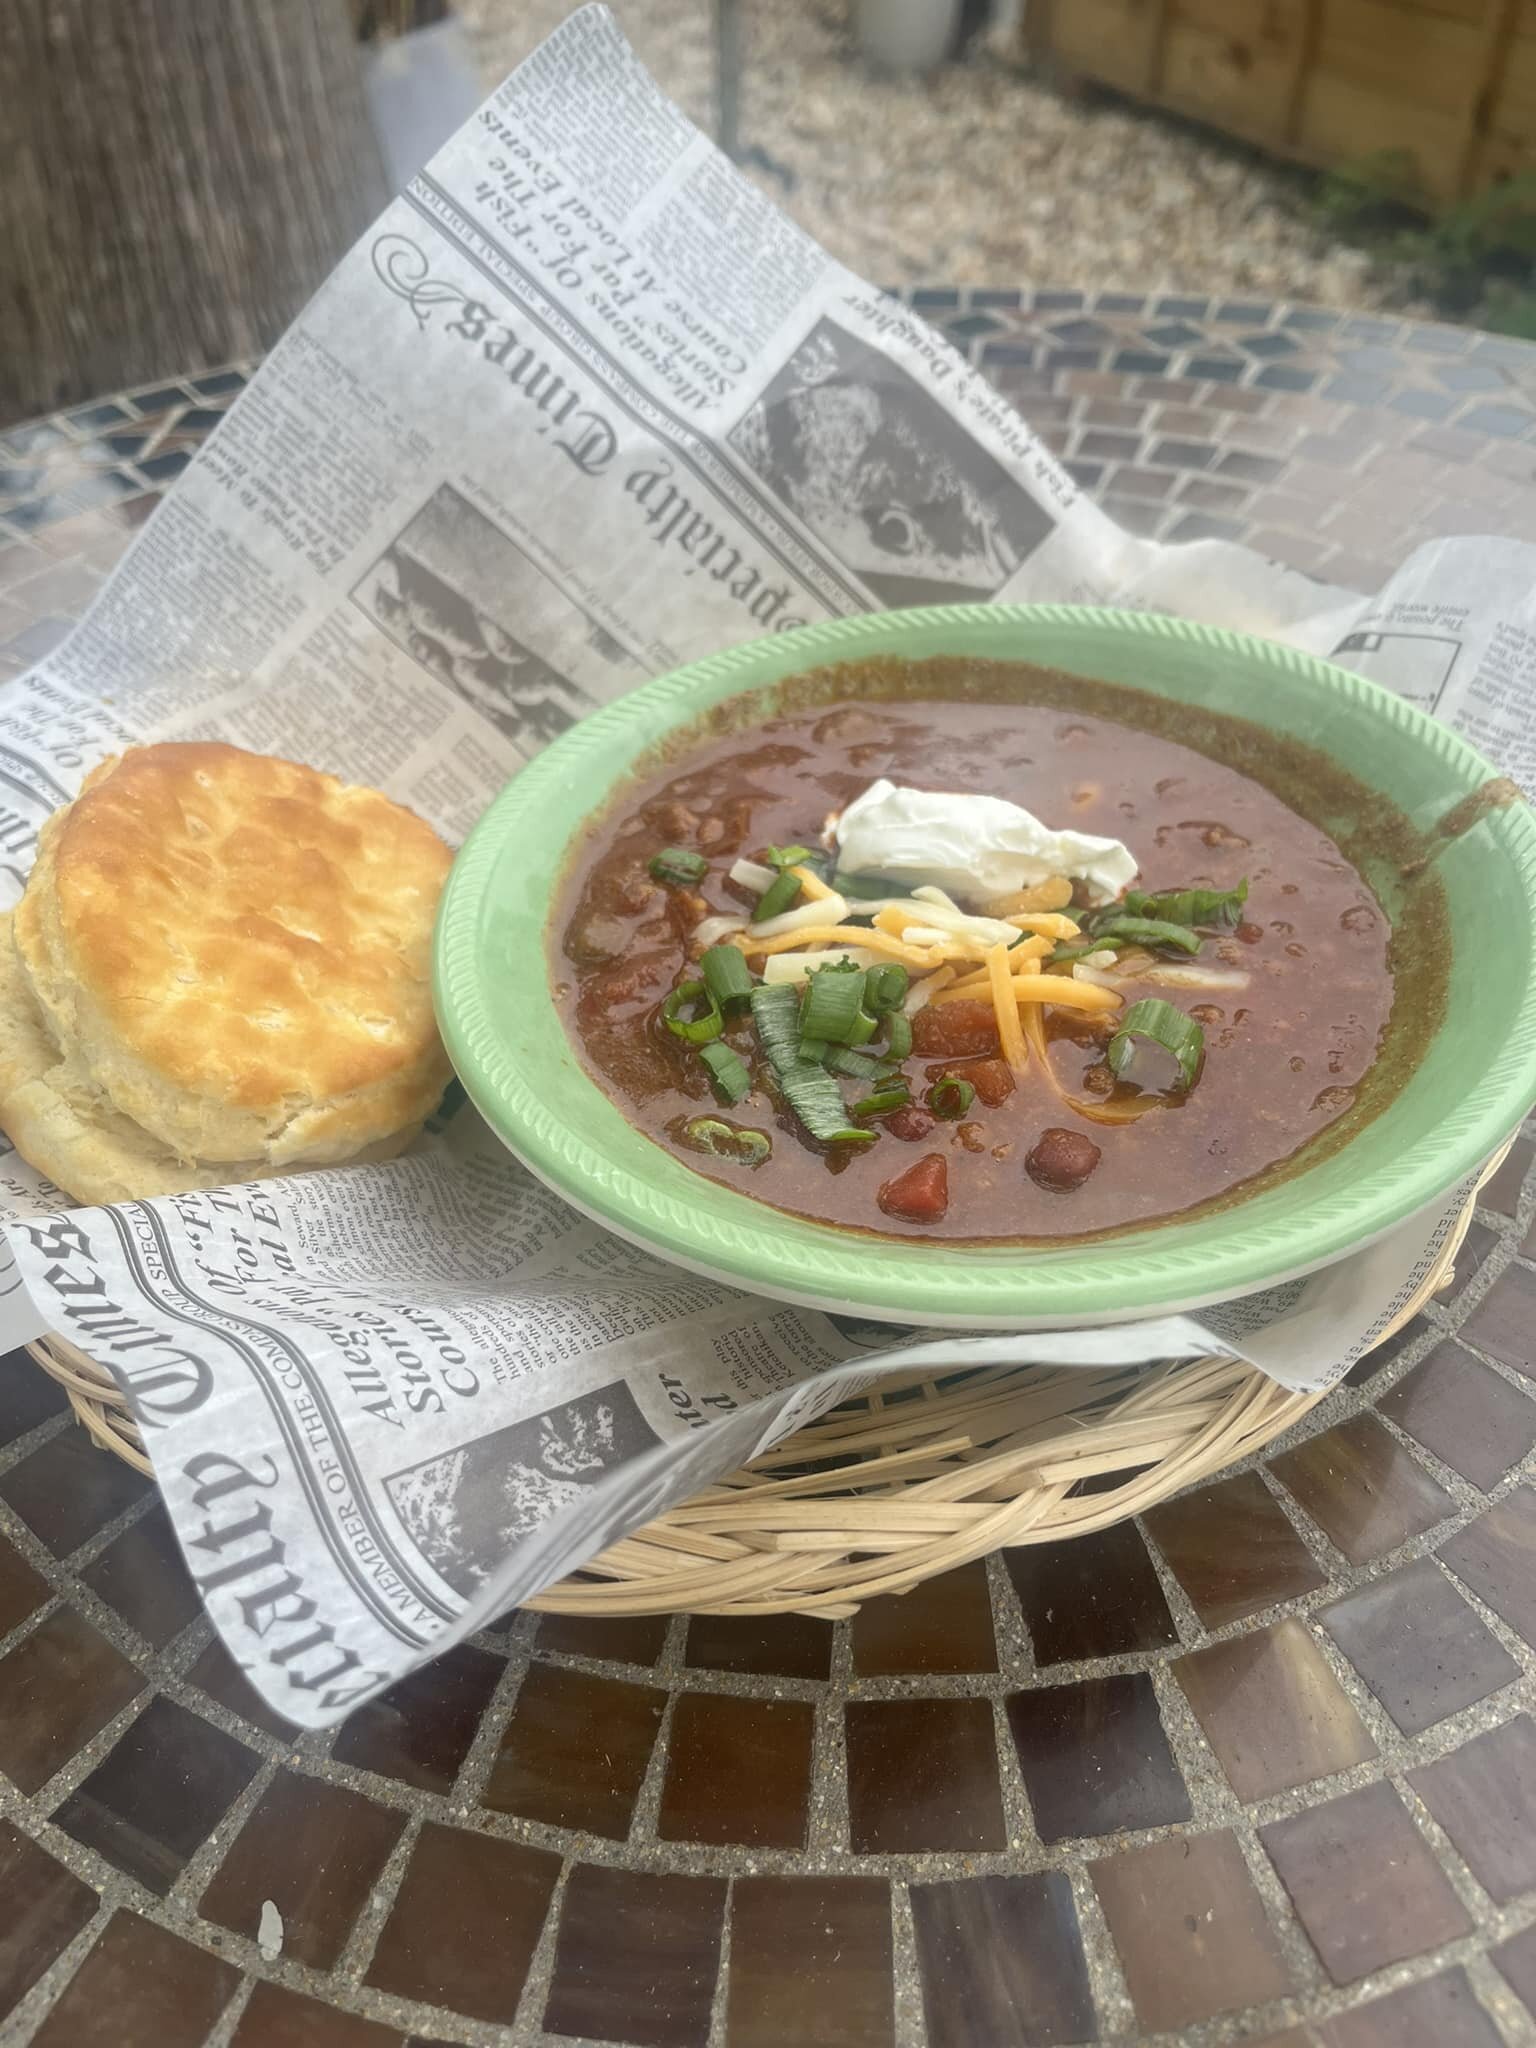 Stay warm on these cooler days with todays soup of the day! 
A nice hot bowl of homemade chili served with a warm buttermilk biscuit.